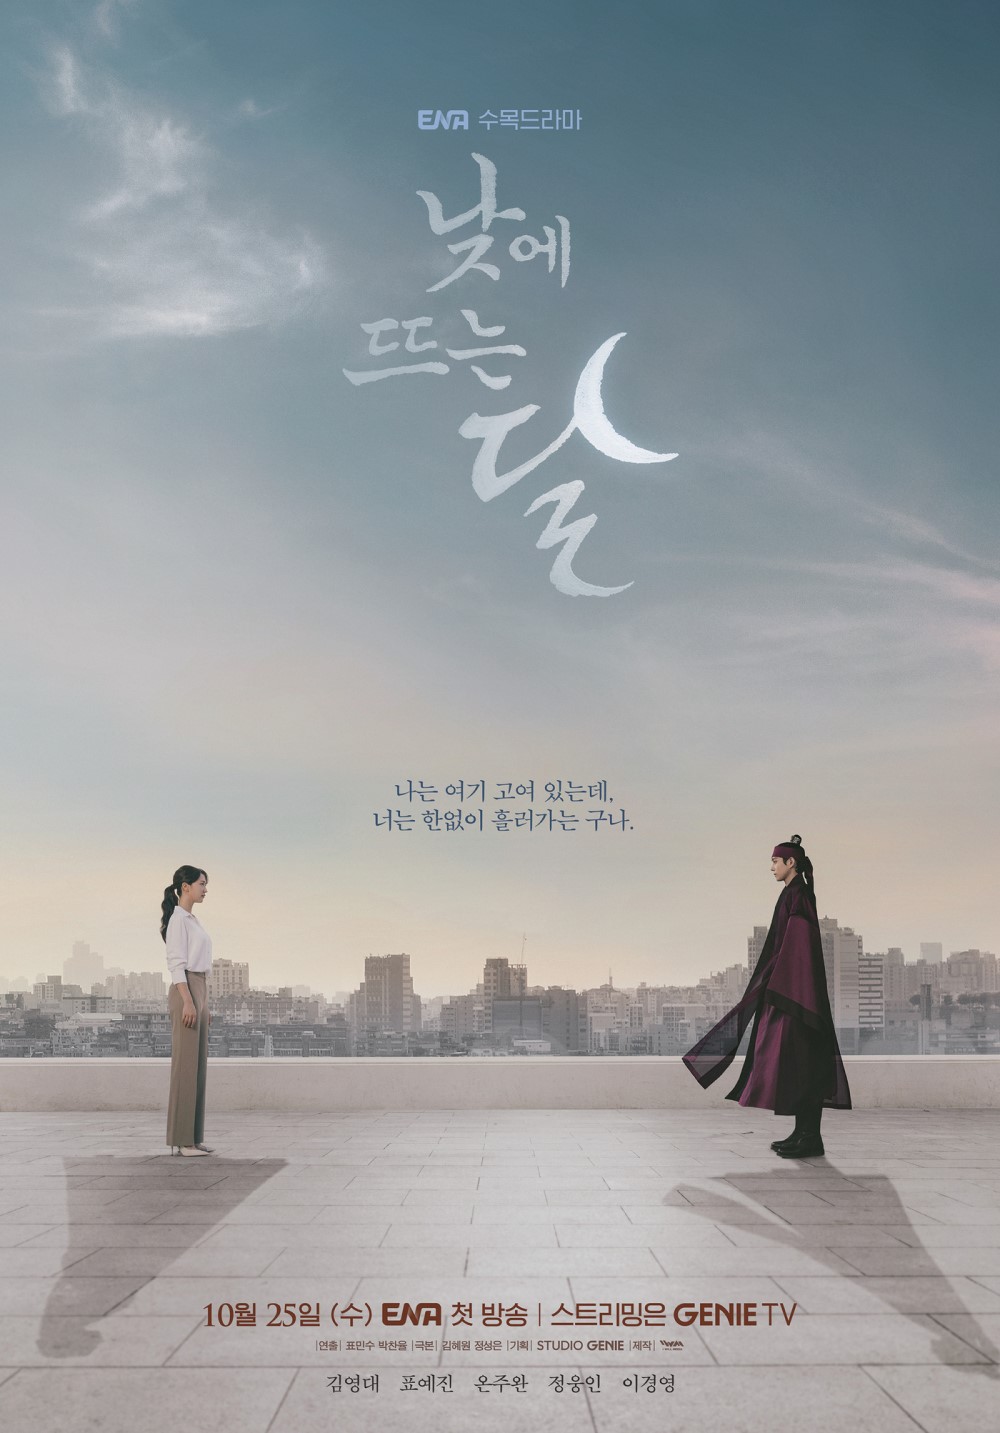 First look at Moon in the Day with Kim Young-dae, Pyo Ye-jin